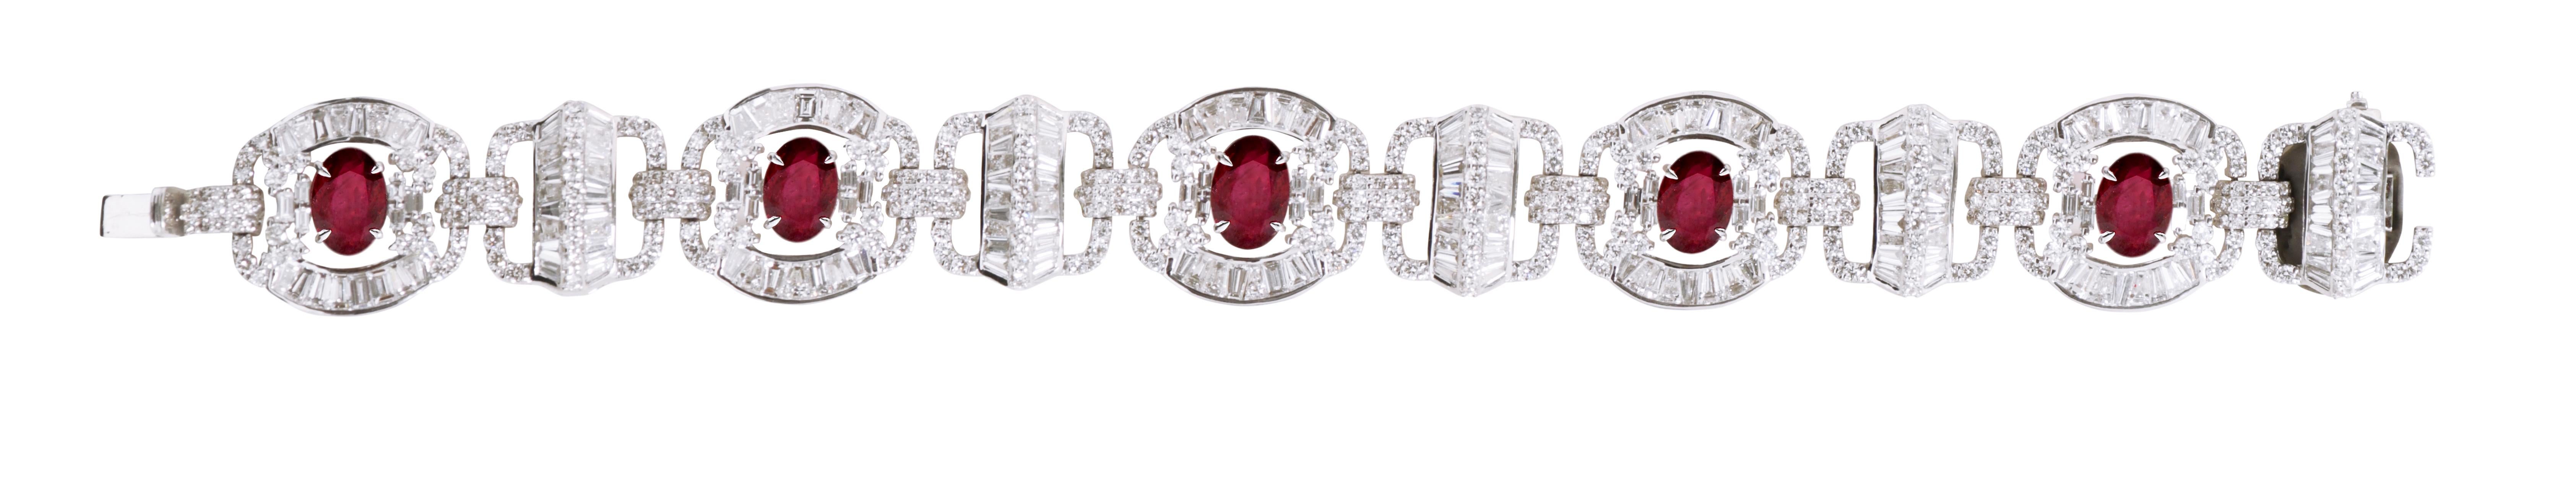 18 Karat White Gold 19.73 Carat Ruby and Diamond Cocktail Bracelet 

Timeless elegance meets an innovative design with this regal Blood Ruby and Diamond bracelet. It is formed using carefully placed Baguette-Cut Diamonds in an intricate